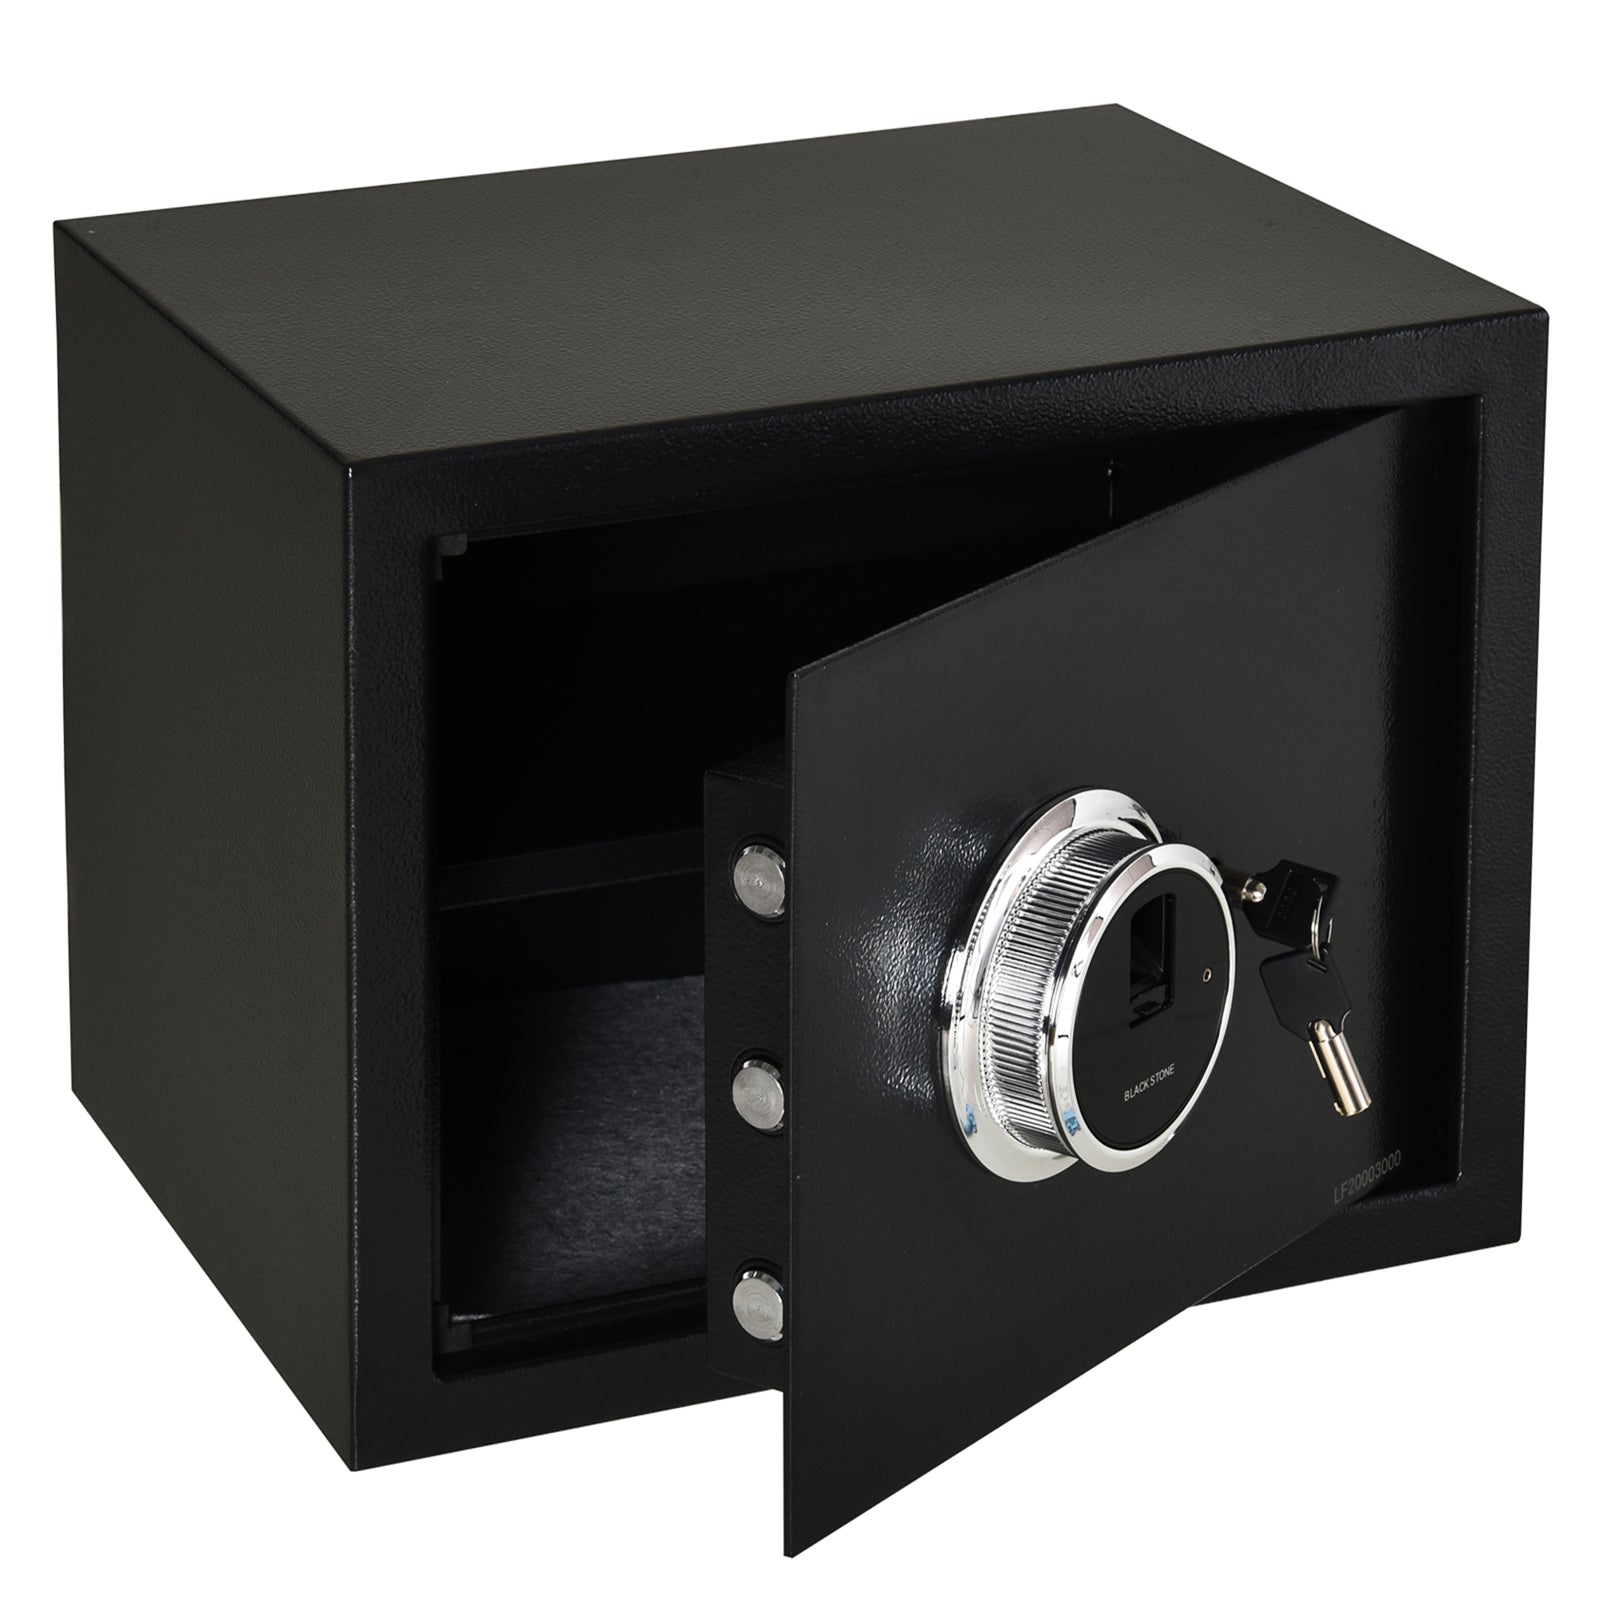 Fingerprint Electronic Security Safe Box, 0.95 Cubic Feet Cabinets, with 2 Emergency Keys, Removable Shelf, Great for Home, Hotel, Office, Black at Gallery Canada